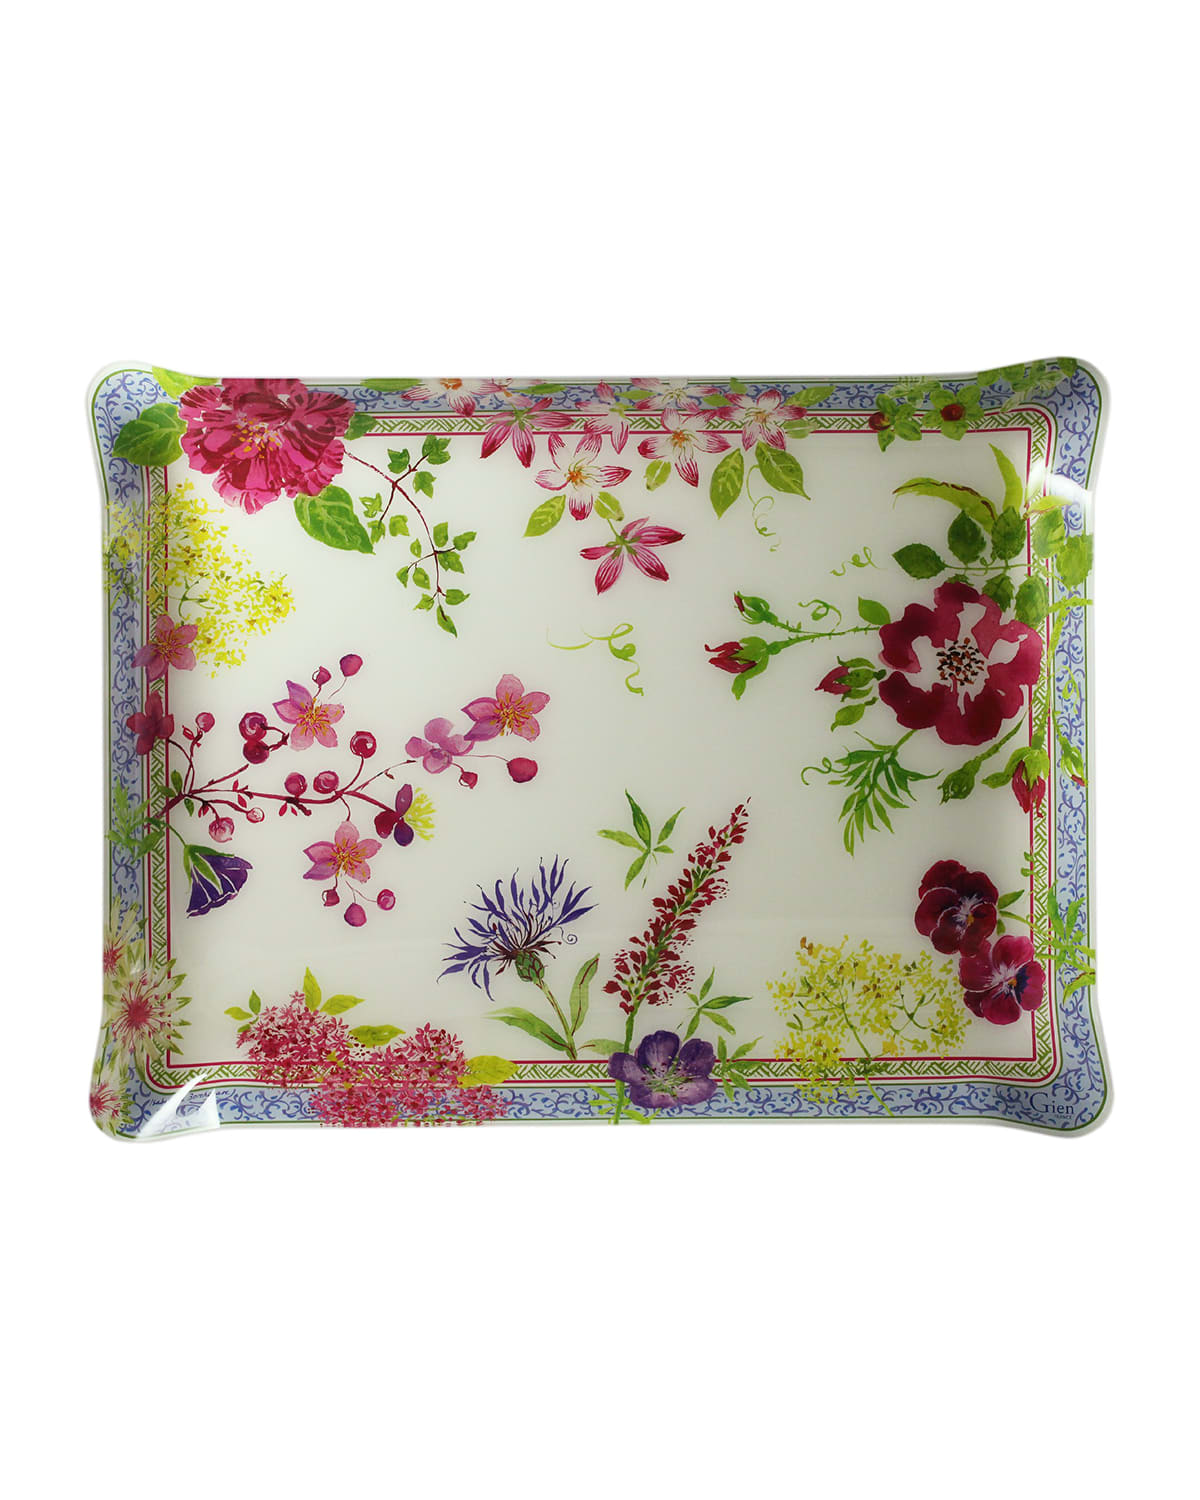 Millefleurs Large Acrylic Serving Tray